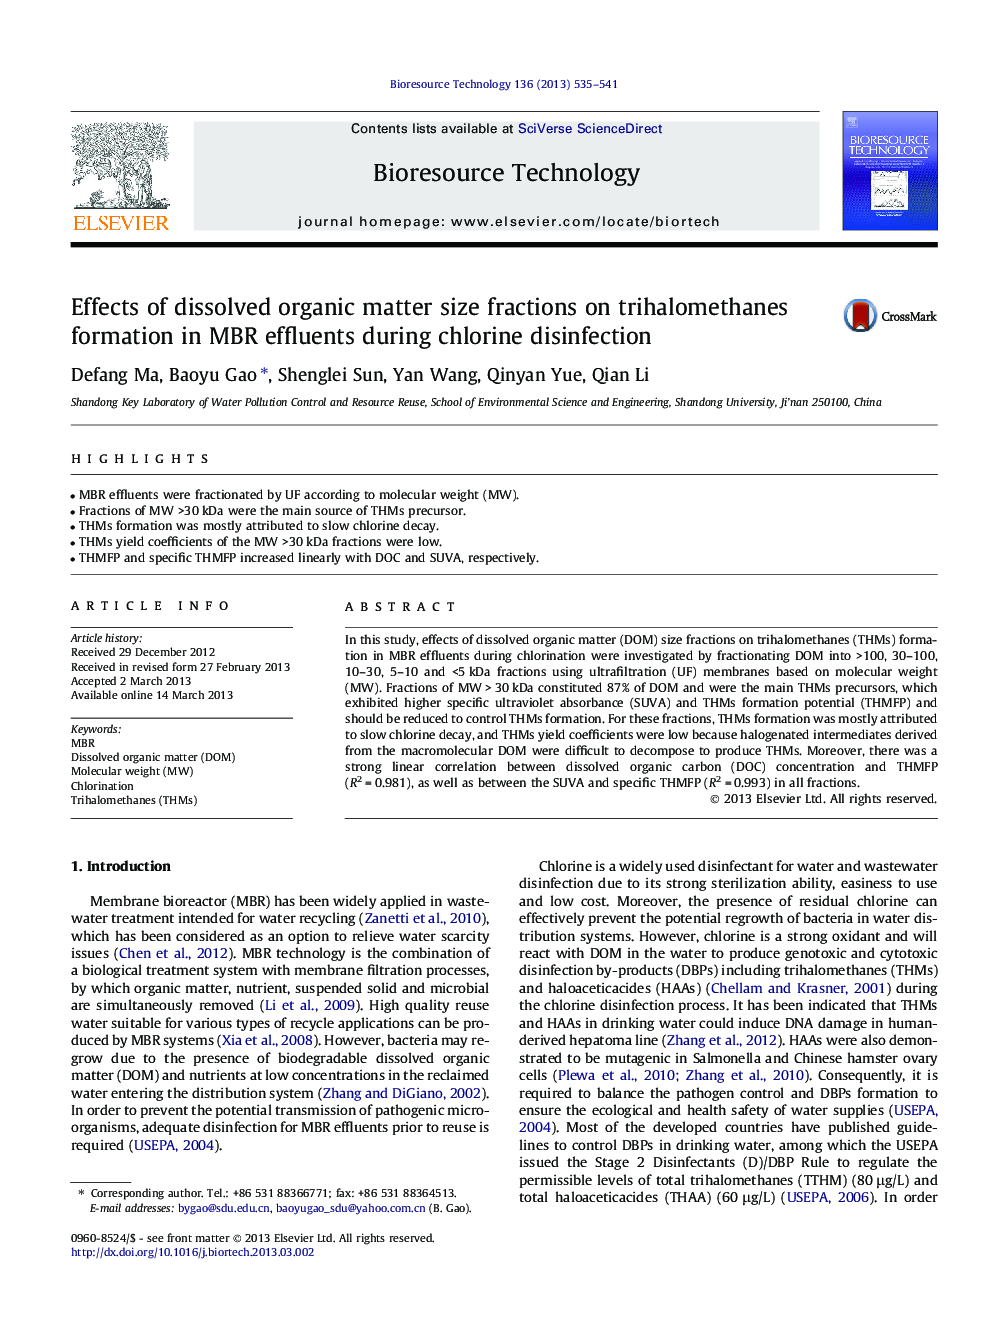 Effects of dissolved organic matter size fractions on trihalomethanes formation in MBR effluents during chlorine disinfection